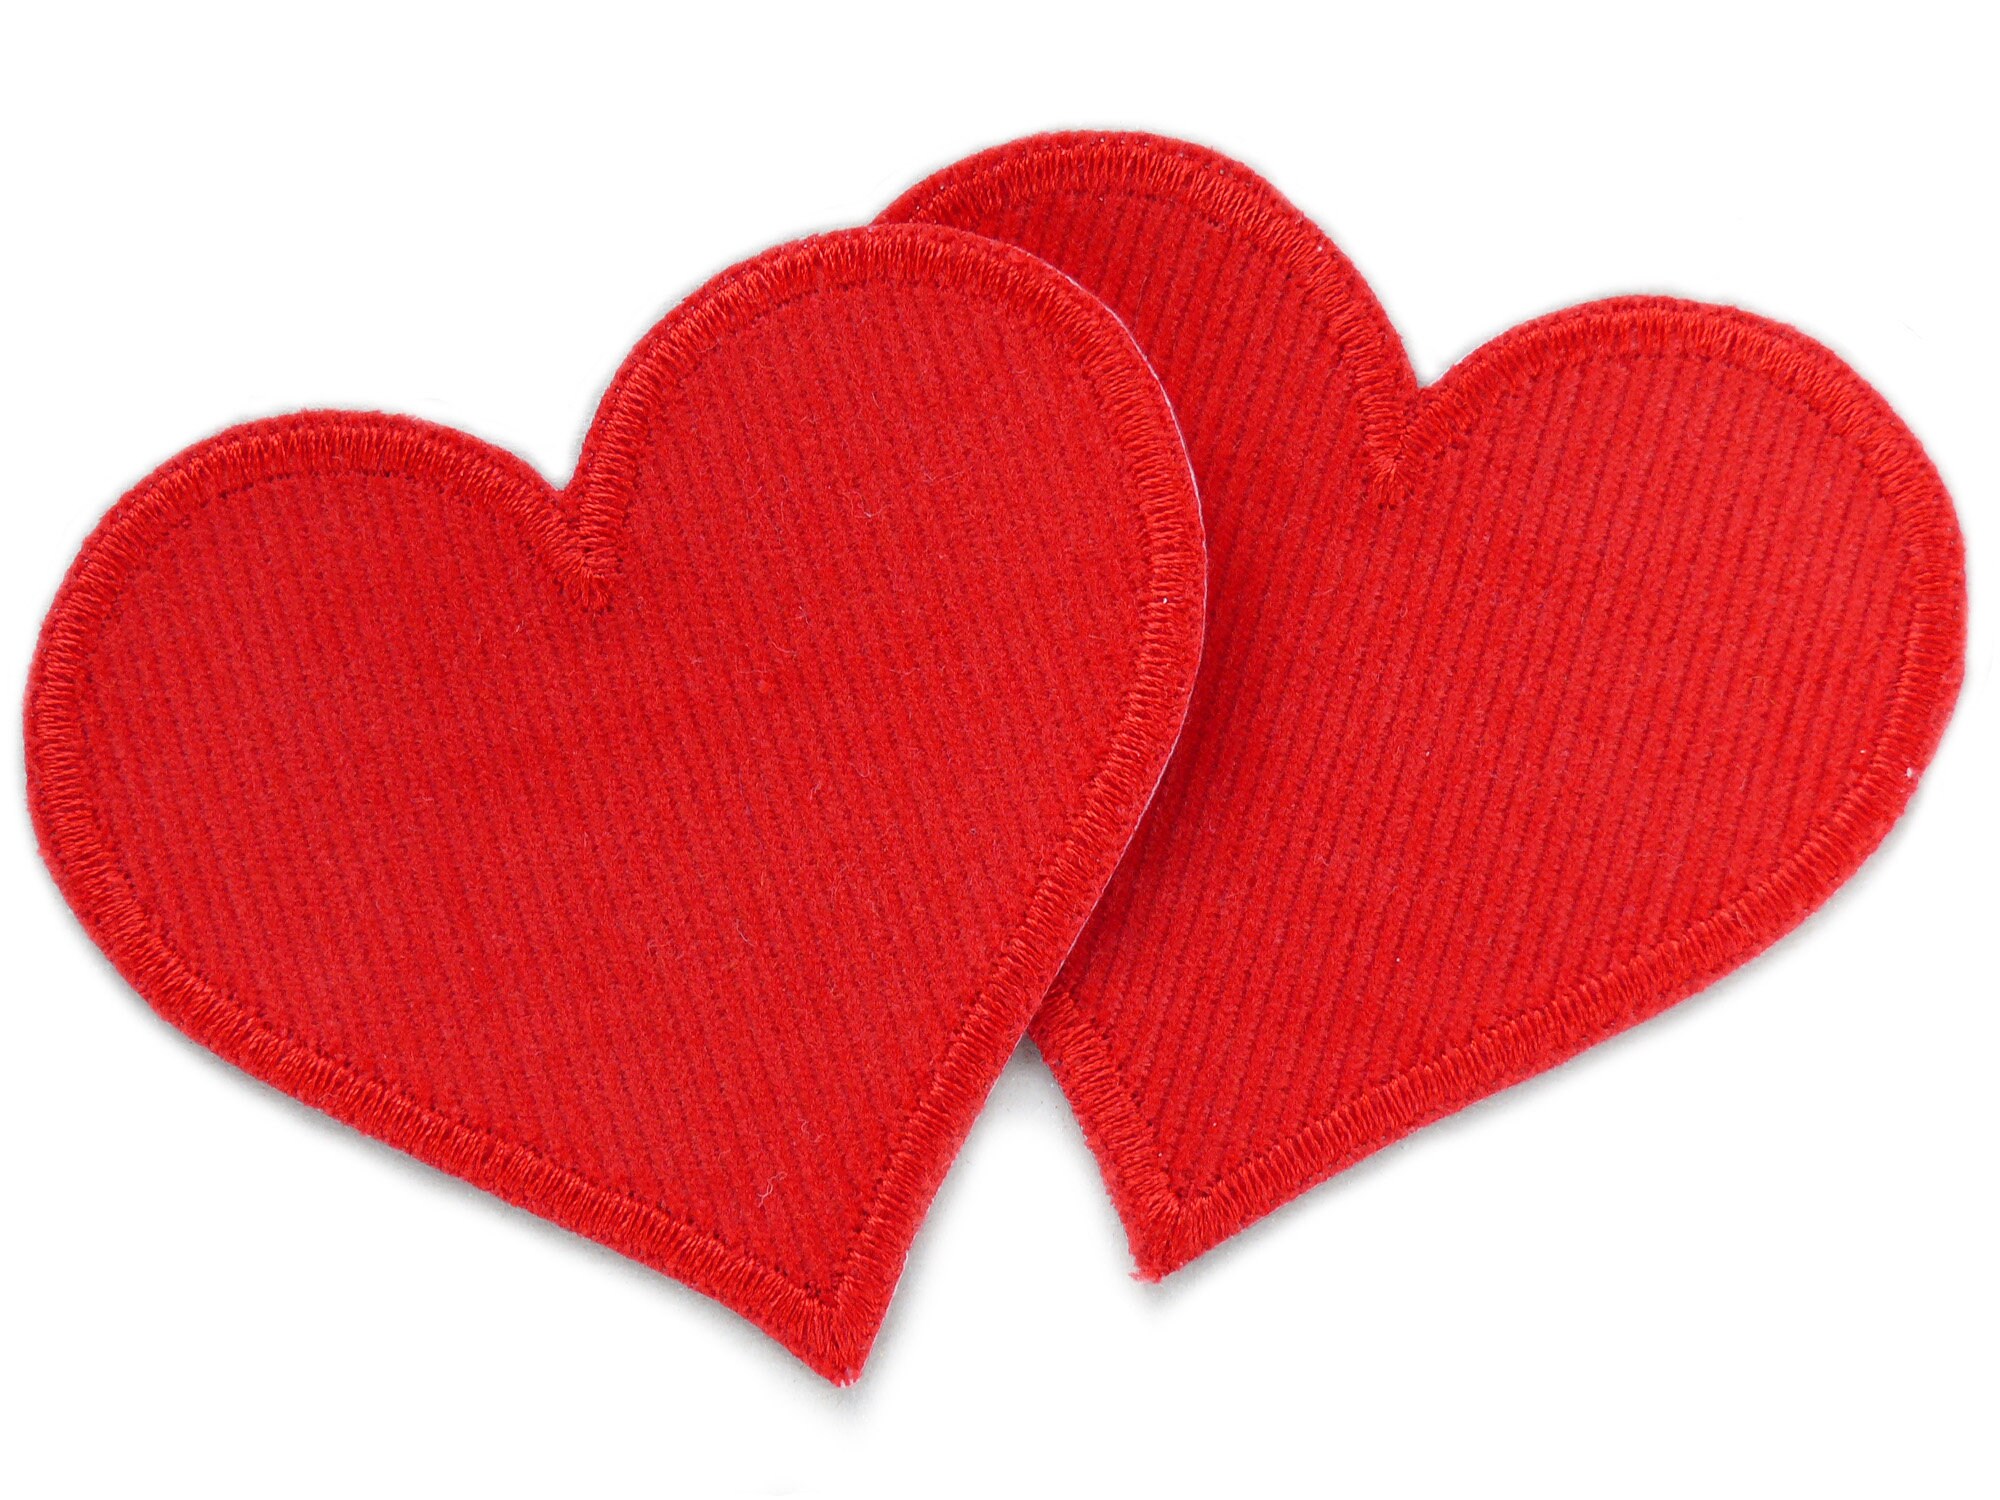 Iron-on Patch Heart Patches, Iron-on Patches, Patches, Iron-on Patches,  Iron-on Patches 